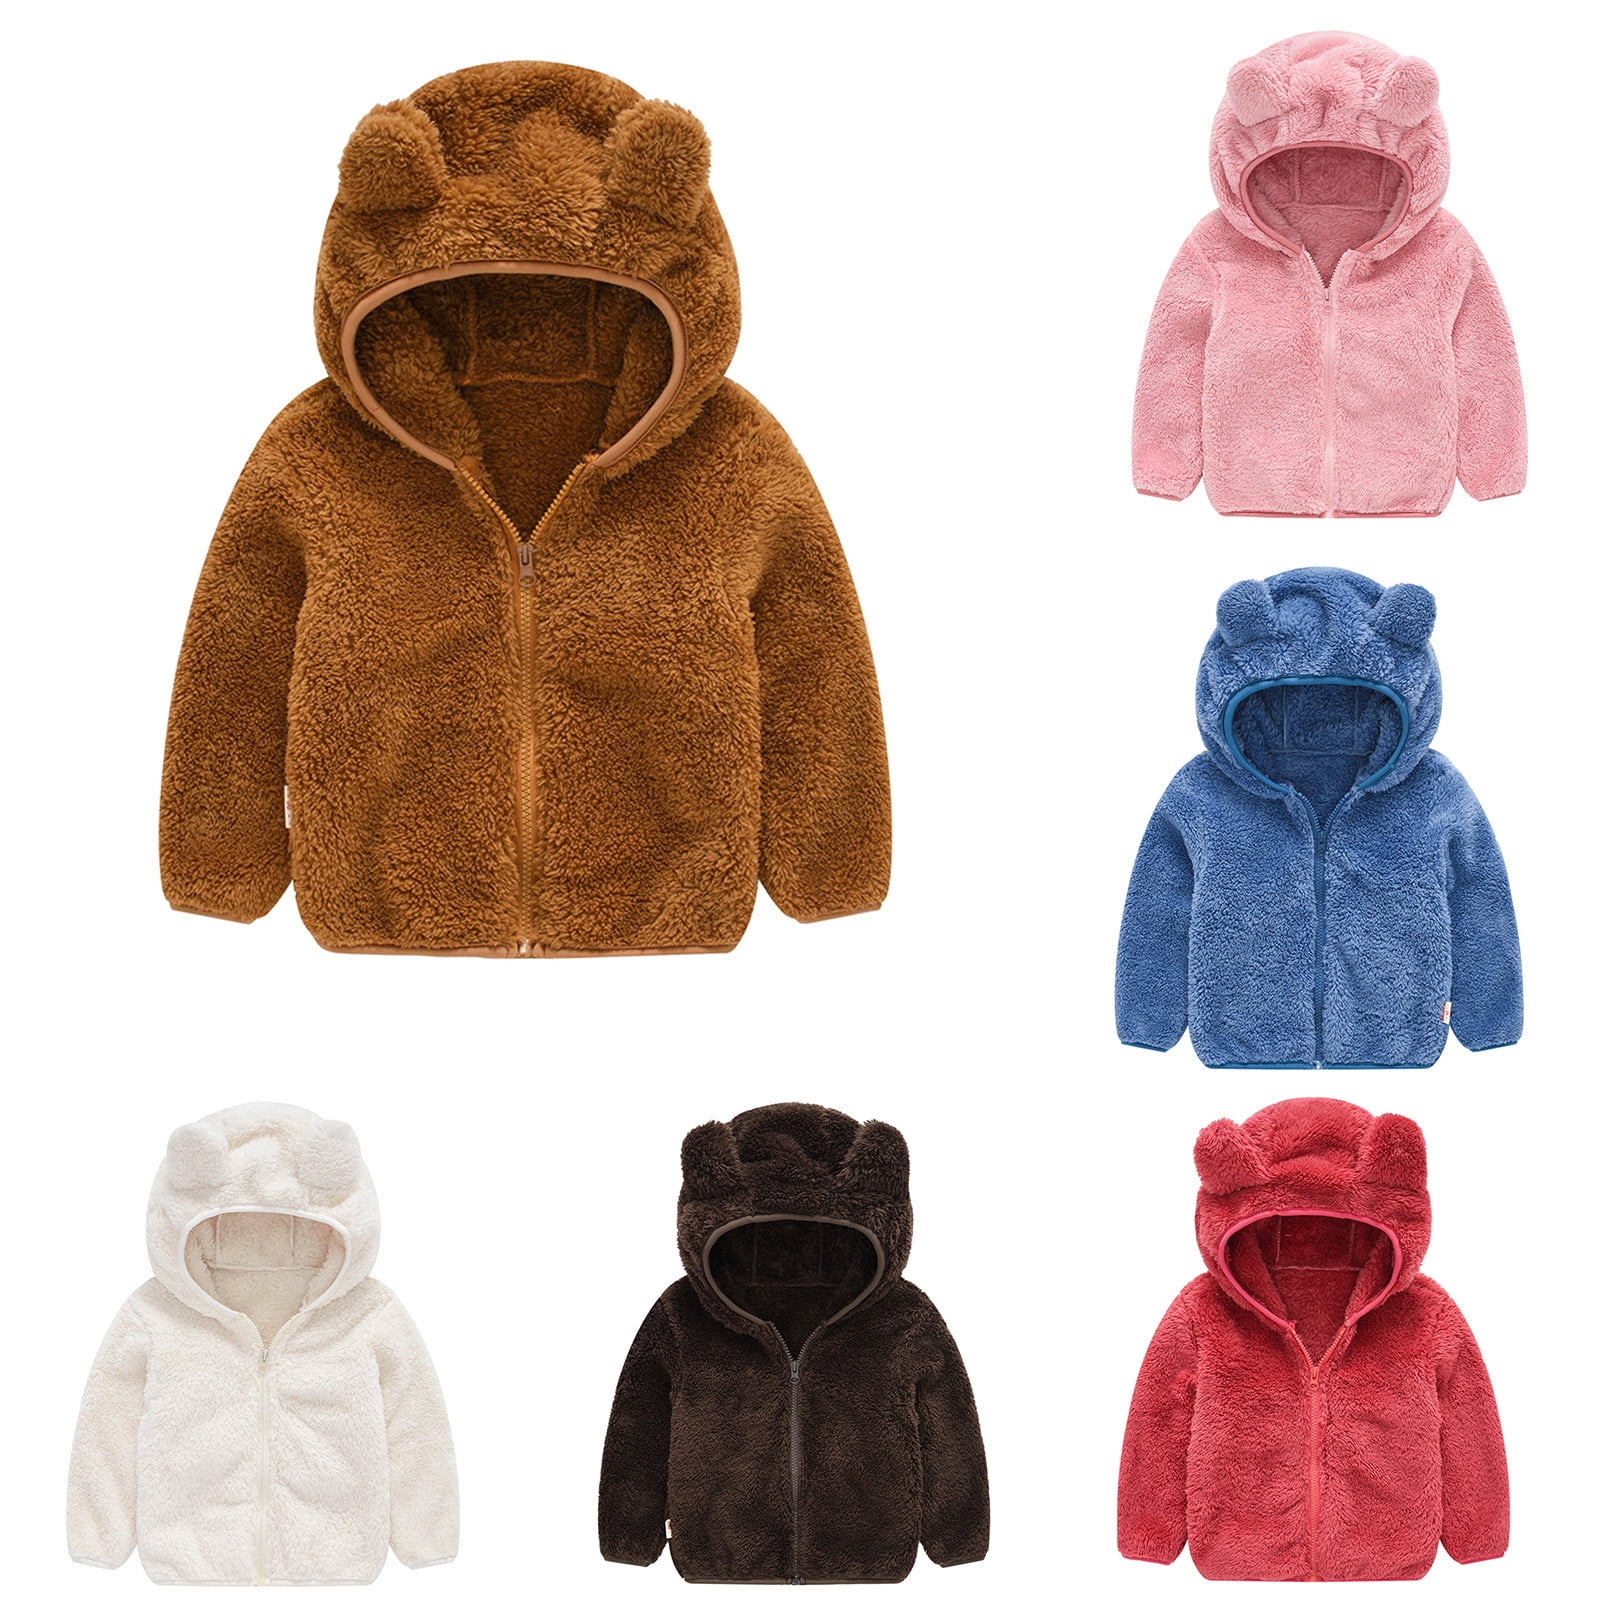 Toddler Faux Fleece Jacket Coats for Girls and Boys Hoodies with Bear Ears Long Sleeve Zip up Oversized Coat Cute Hoodie 